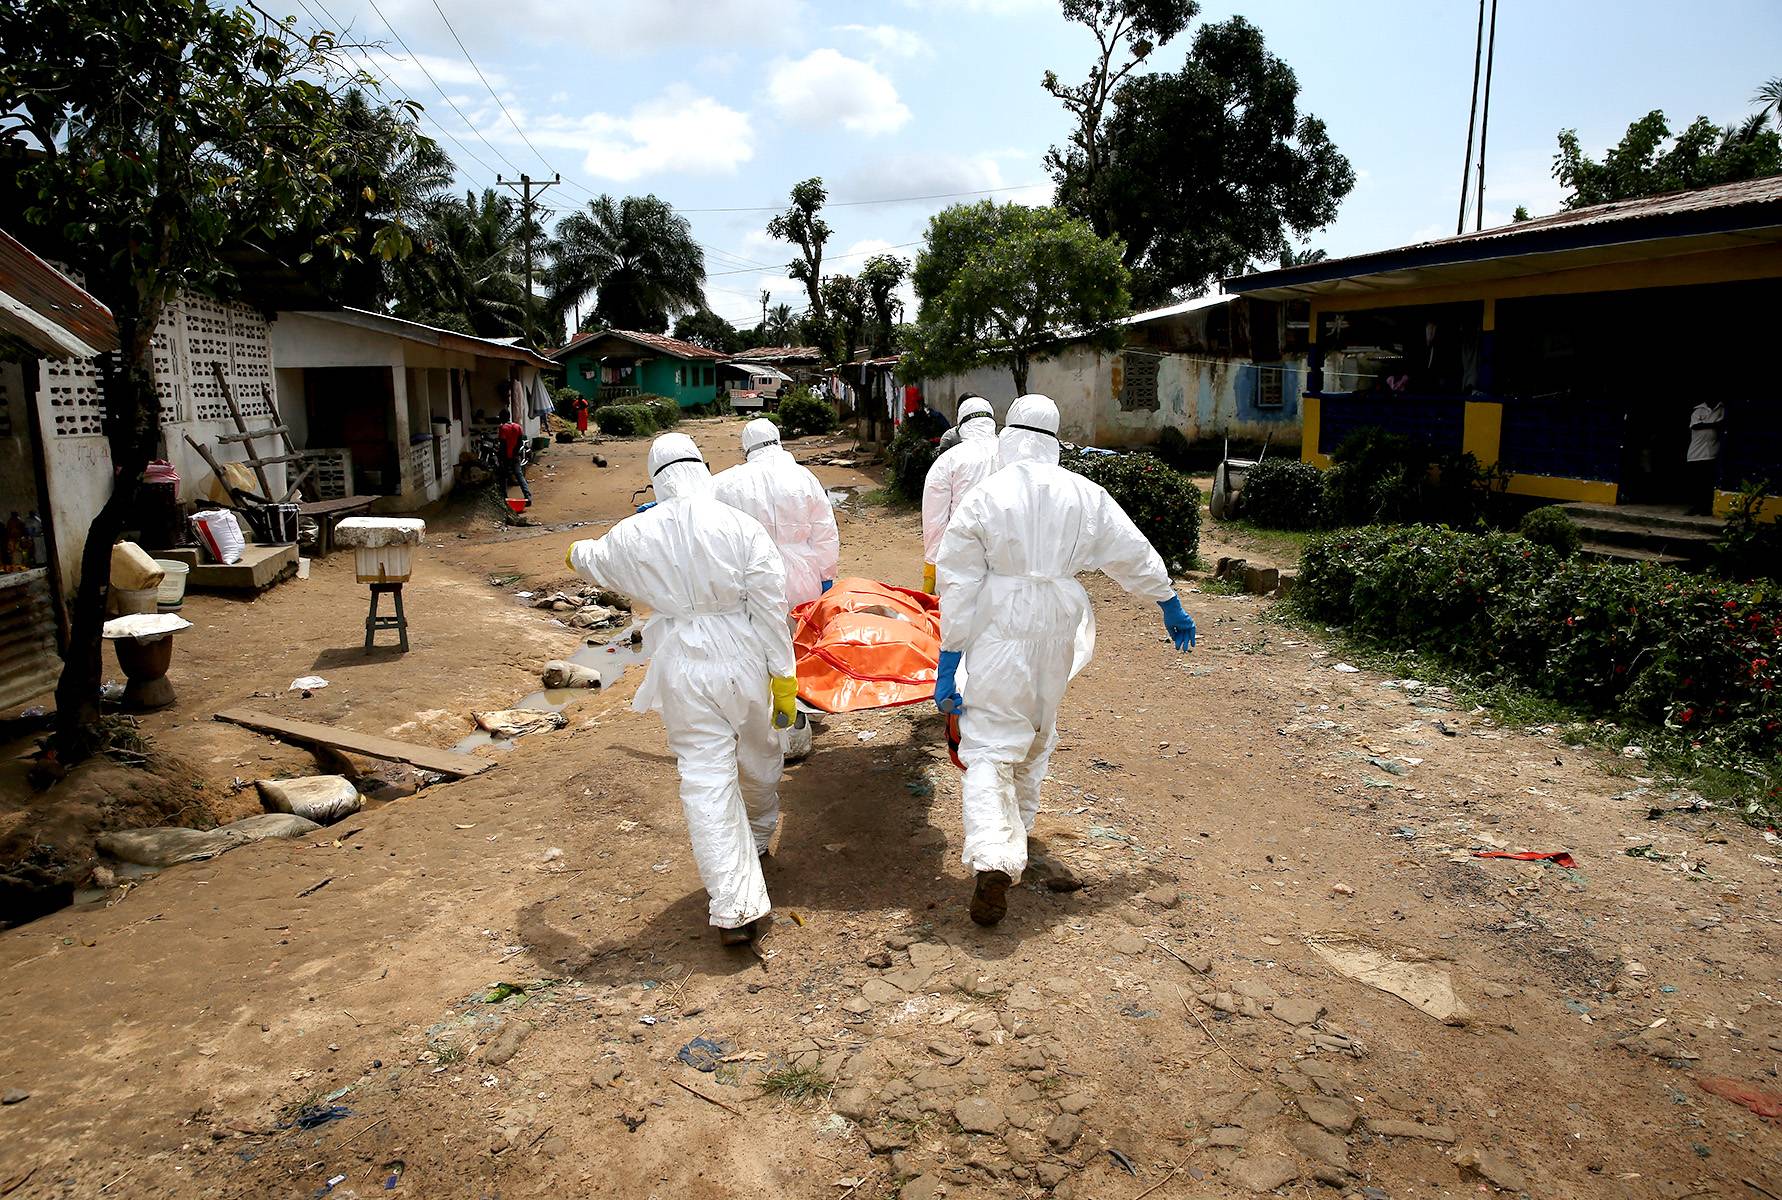 Ebola Death Toll Reaches 4,500 in West Africa